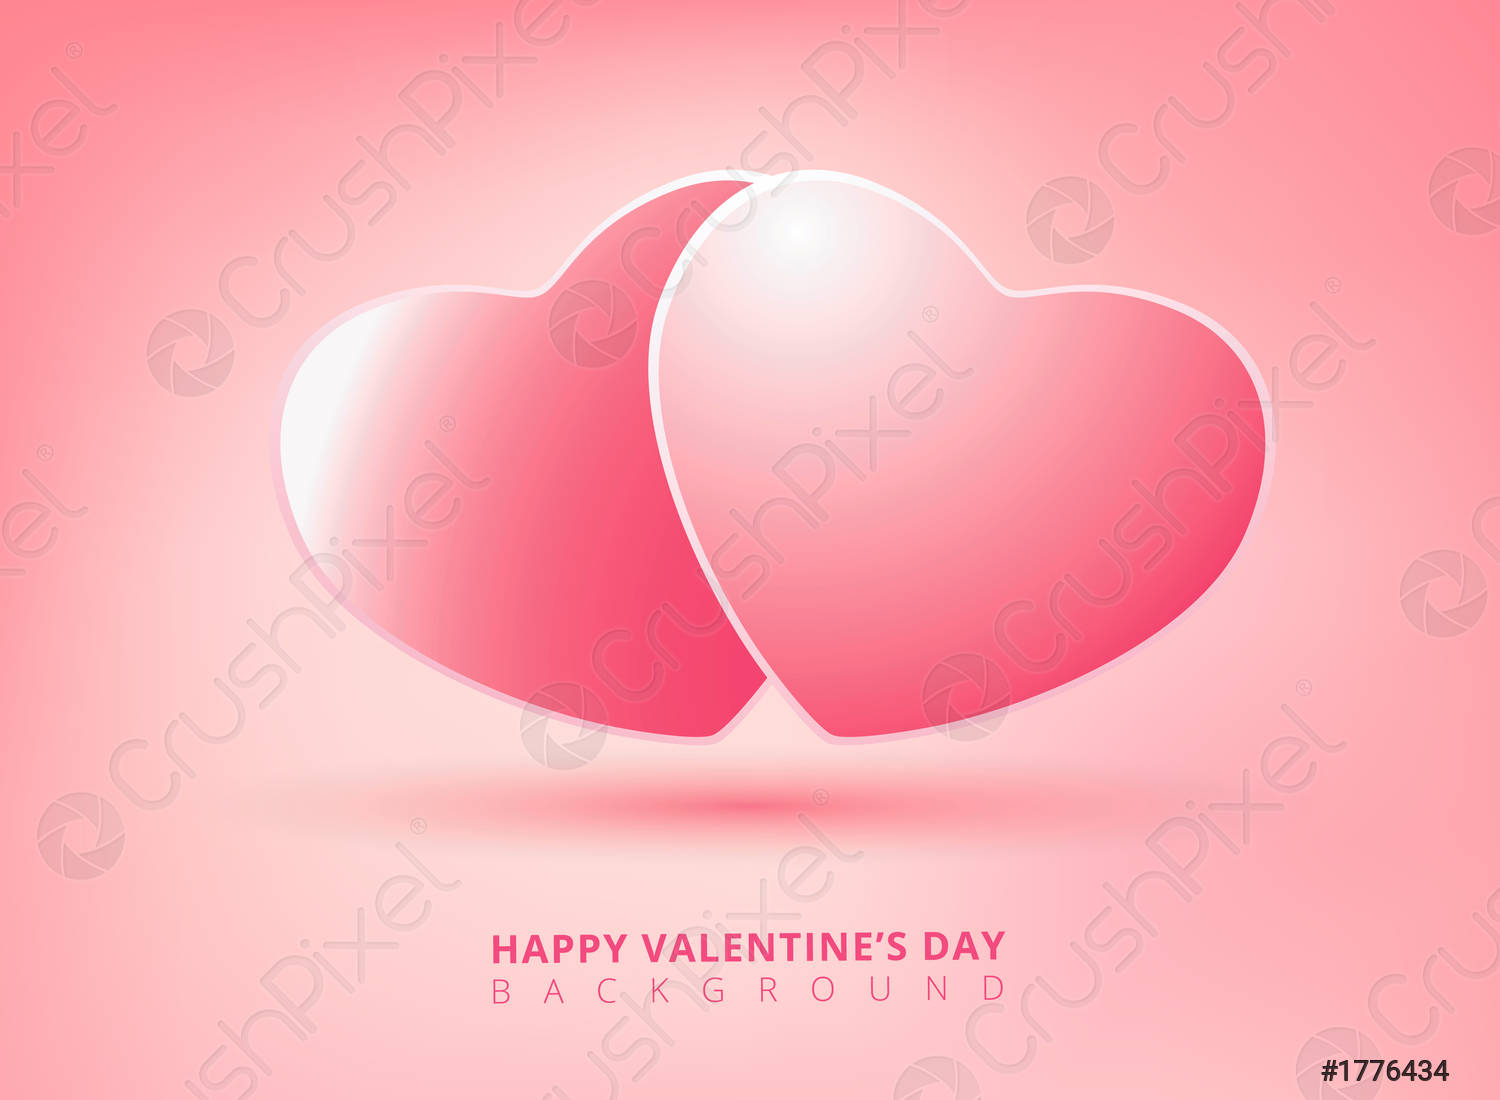 Happy valentines day on pink background with twin hearts Vector